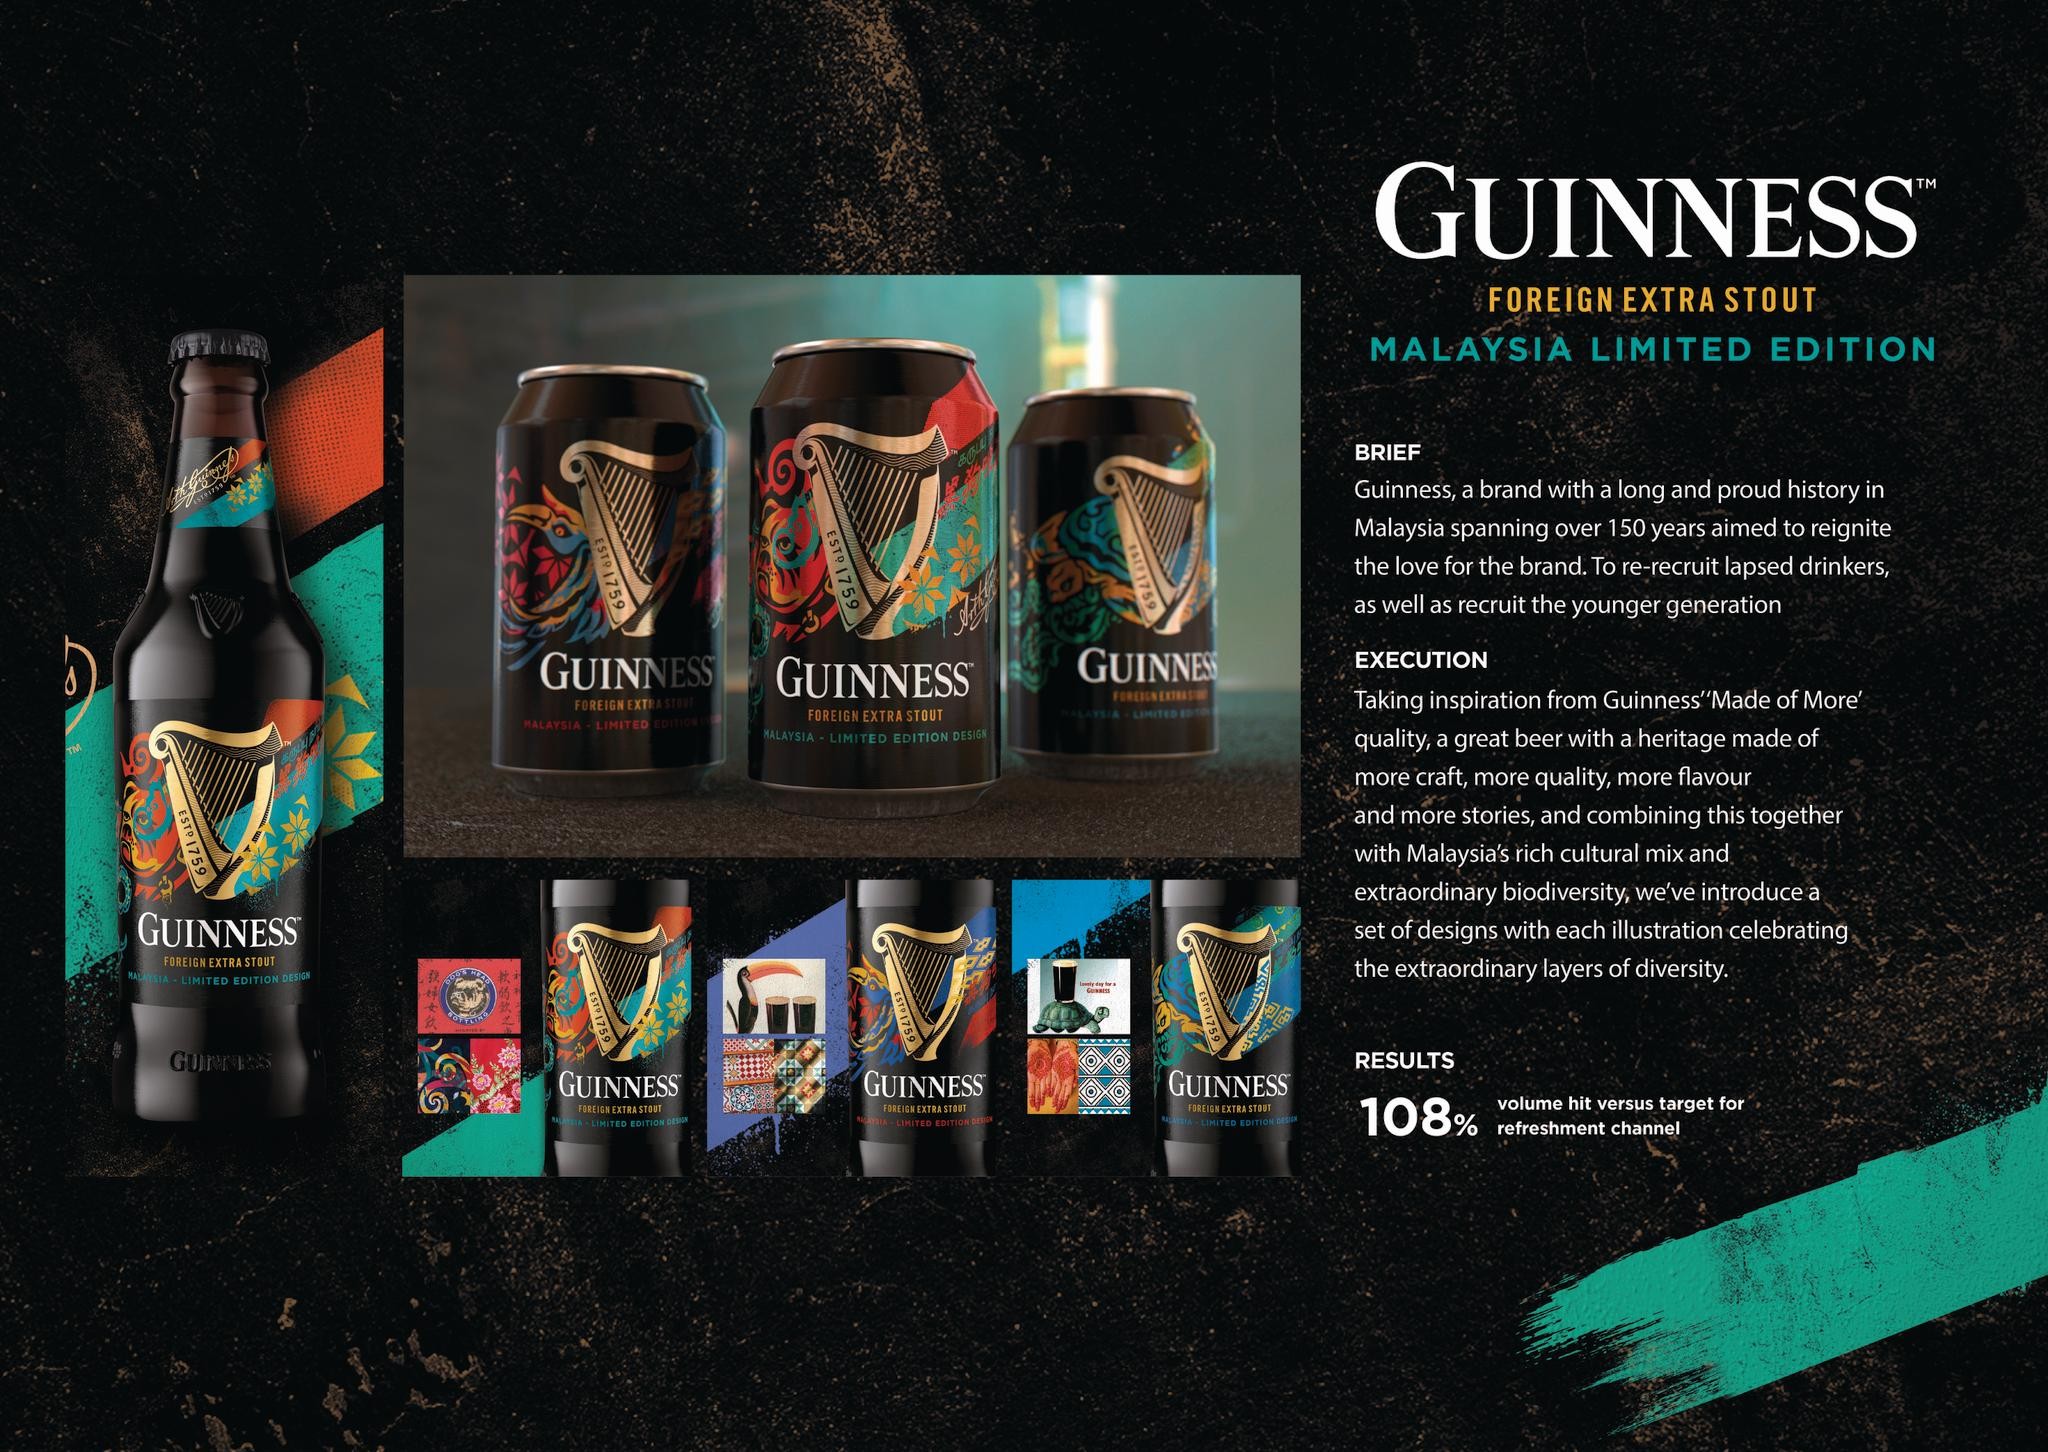 Guinness Malaysia Limited Edition